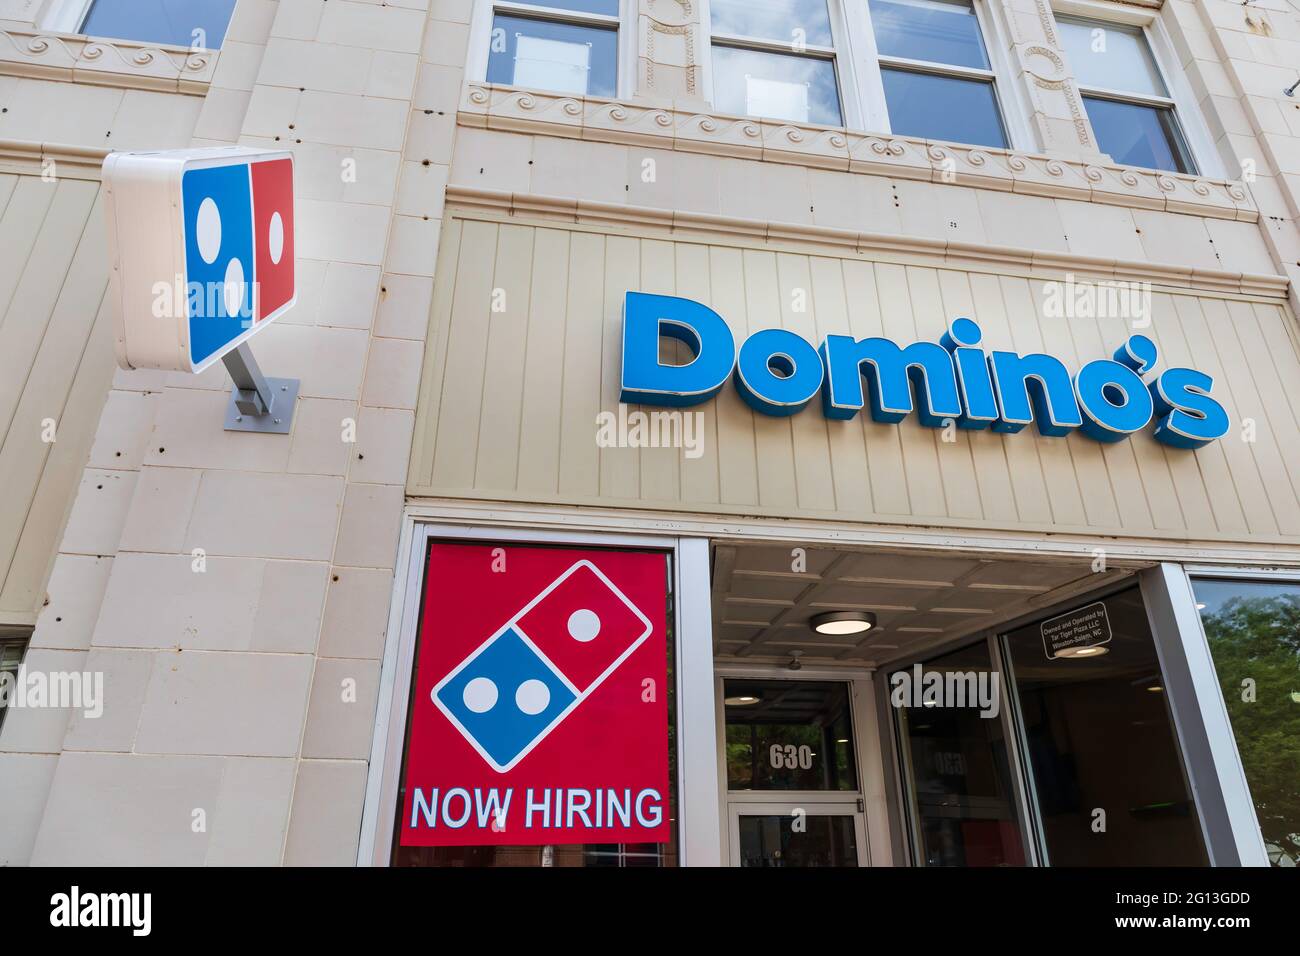 WINSTON-SALEM, NC, USA-1 JUNE 2021: Facade of Domino's on 4th St., showing 'Domino's' sign, logo, and 'now hiring' sign. Stock Photo